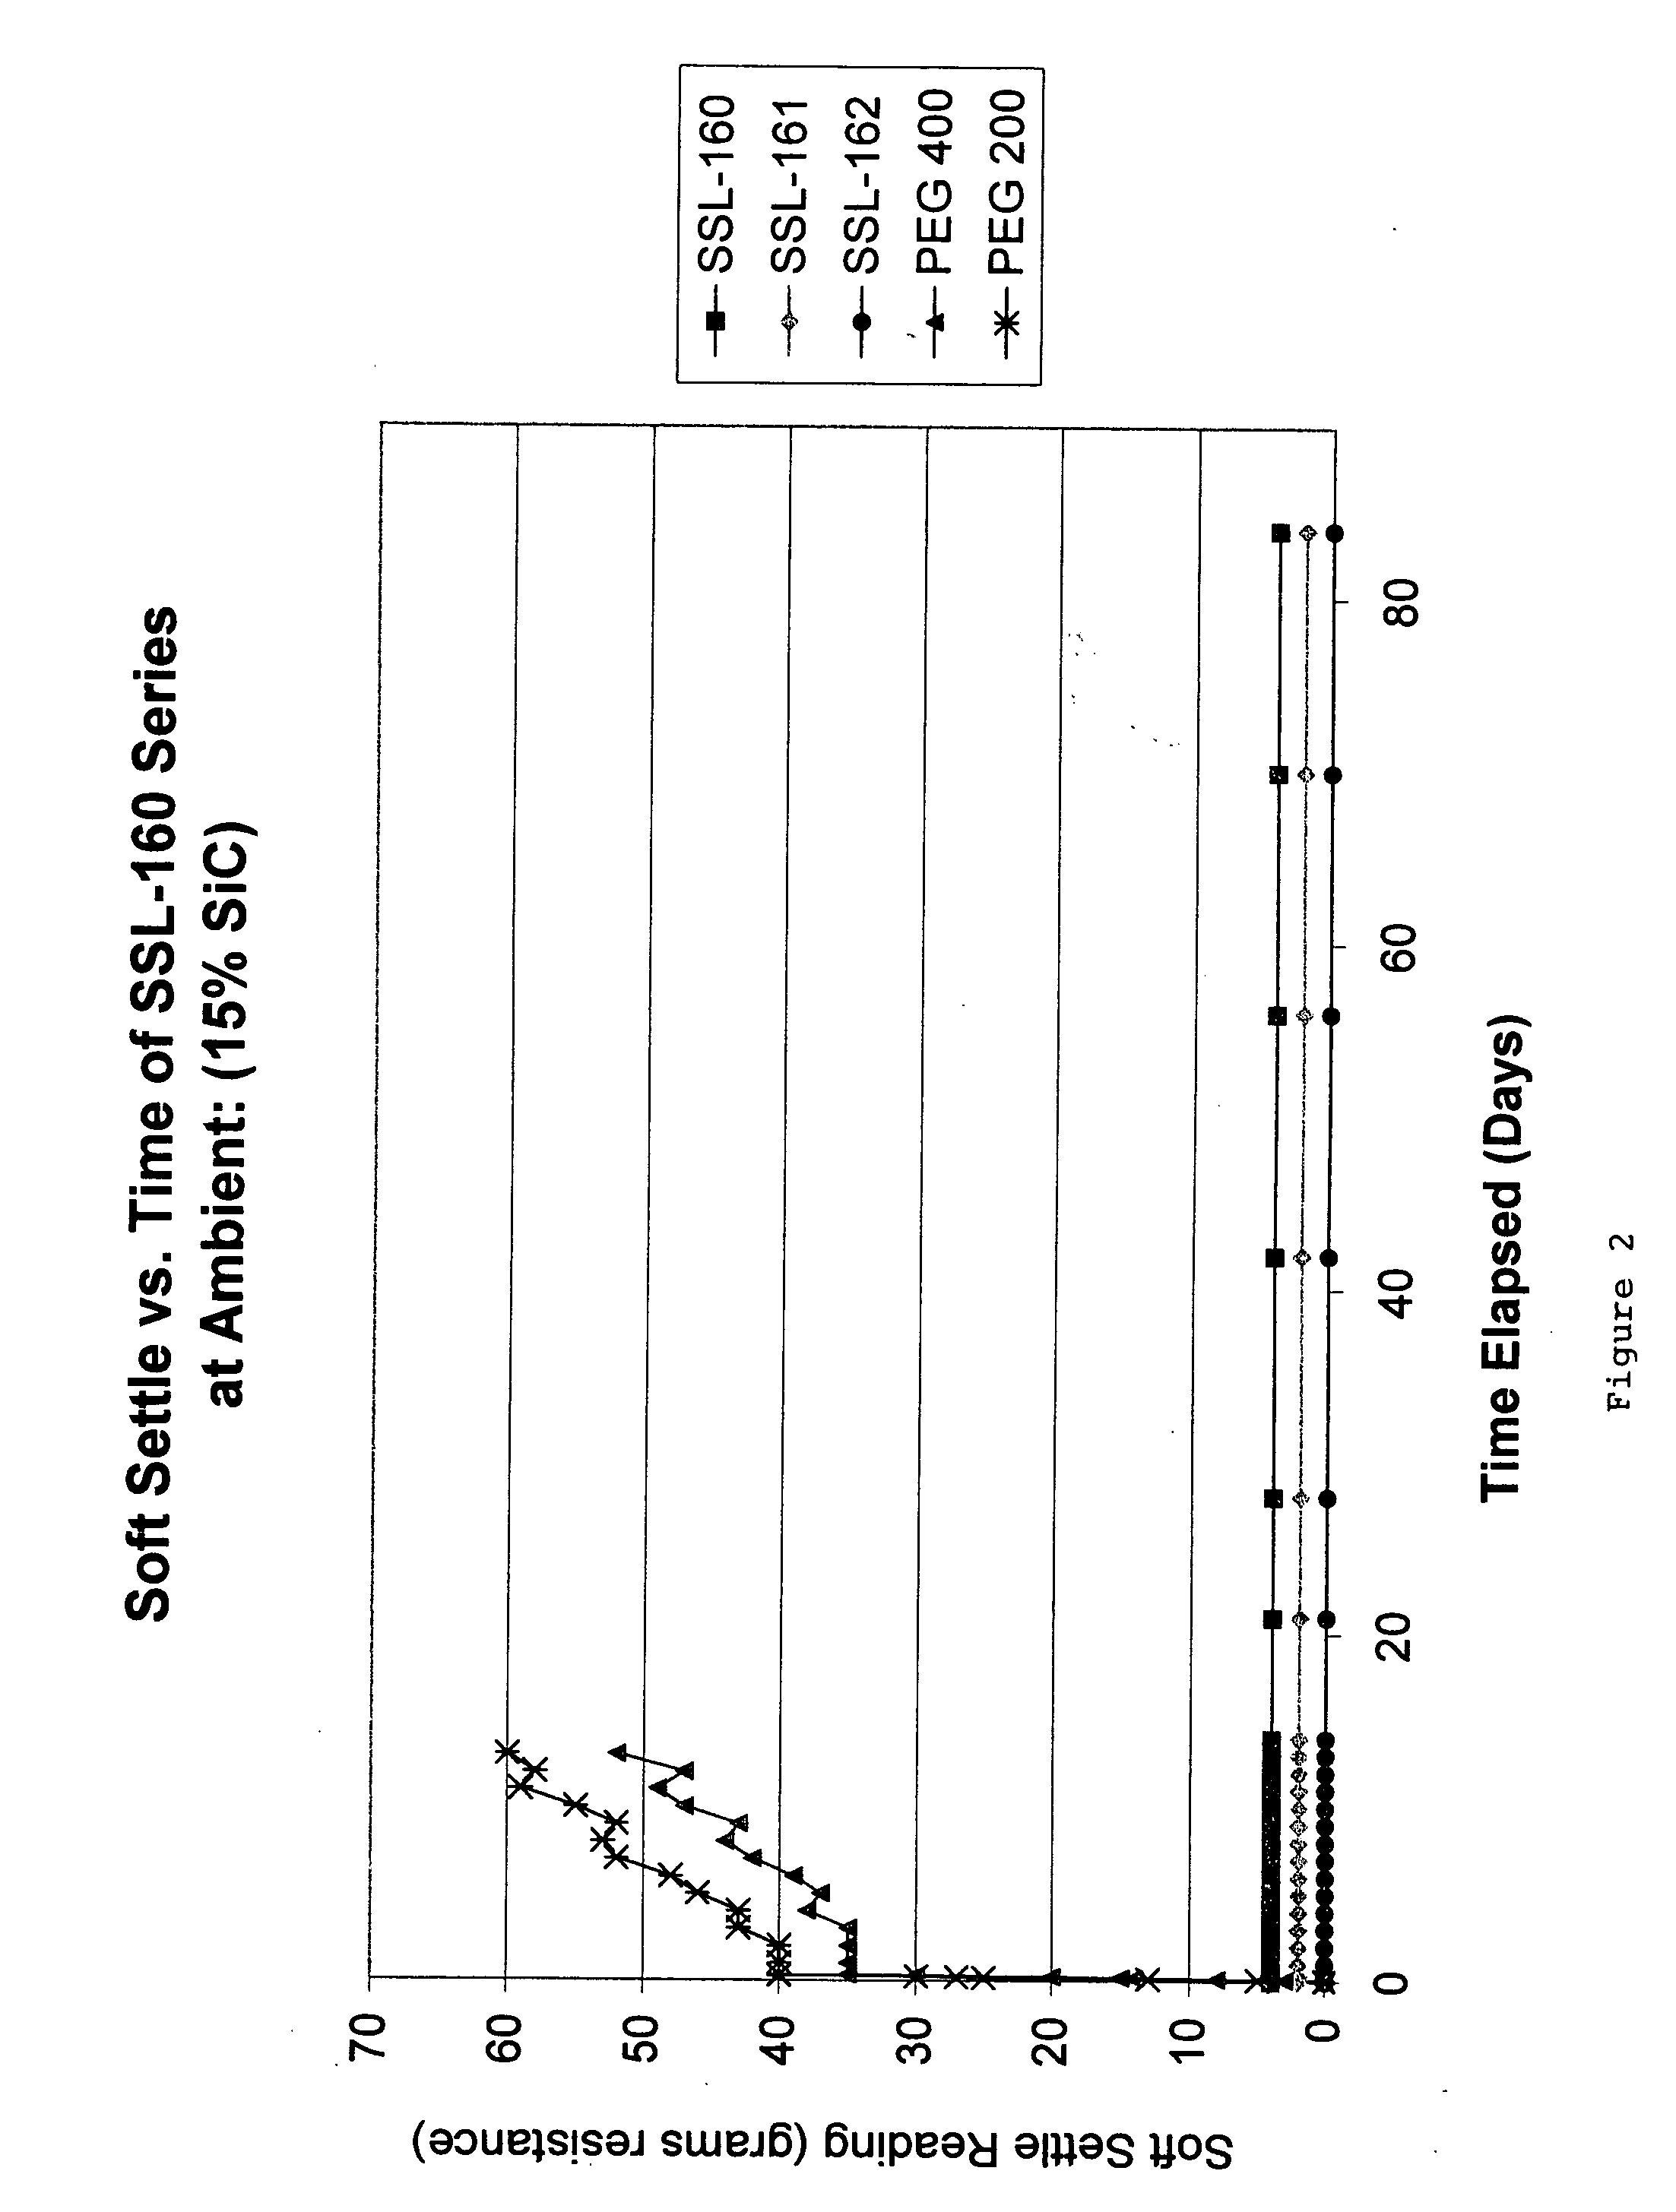 Cutting and lubricating composition for use with a wire cutting apparatus